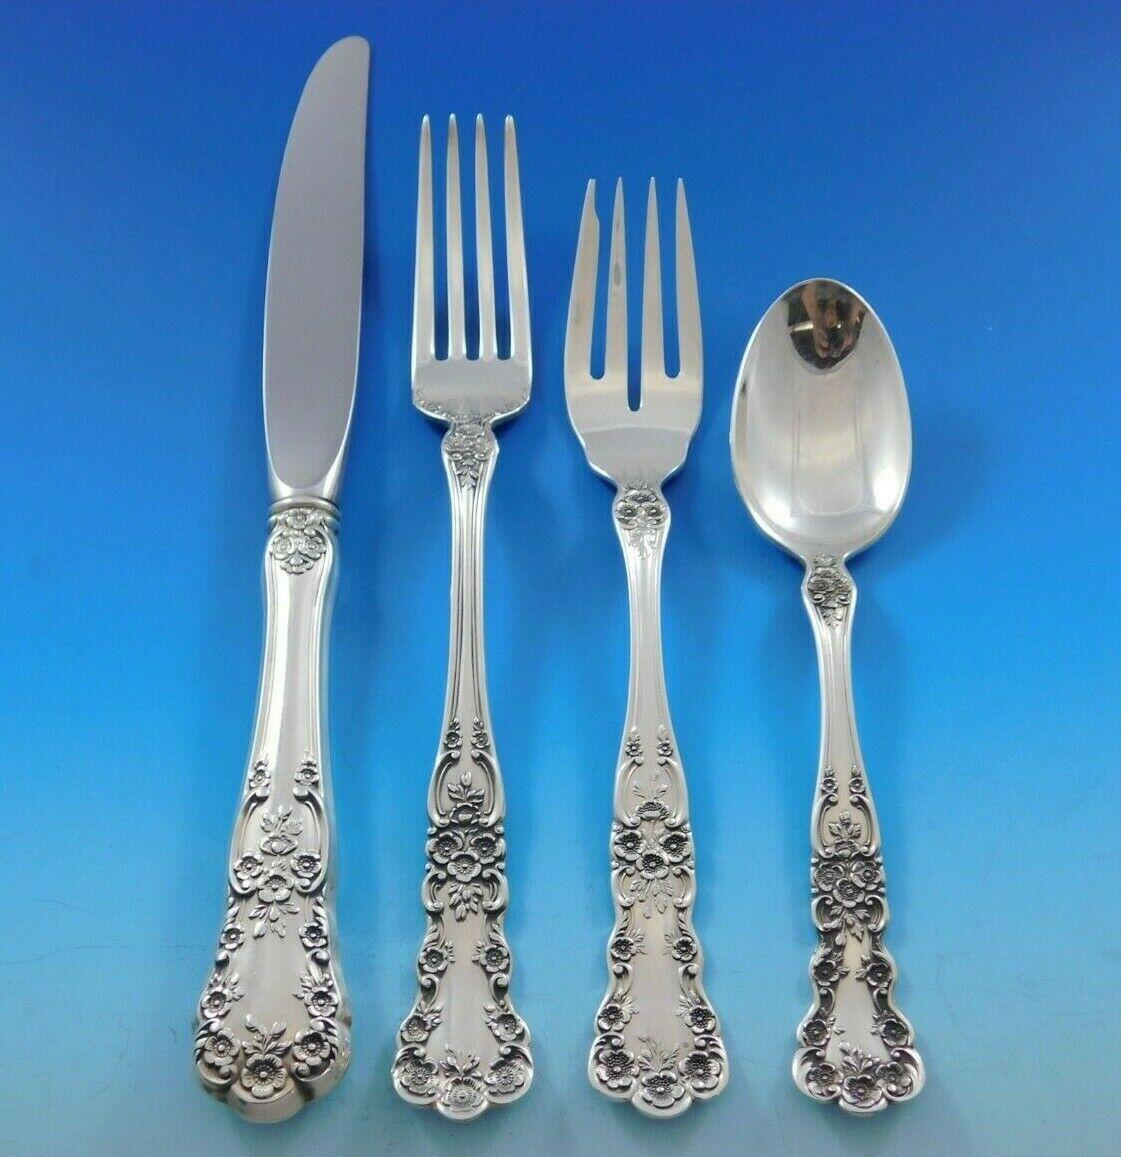 Buttercup by Gorham Sterling Silver Flatware Service for 12 Set 67 Pc Place Size In Excellent Condition For Sale In Big Bend, WI